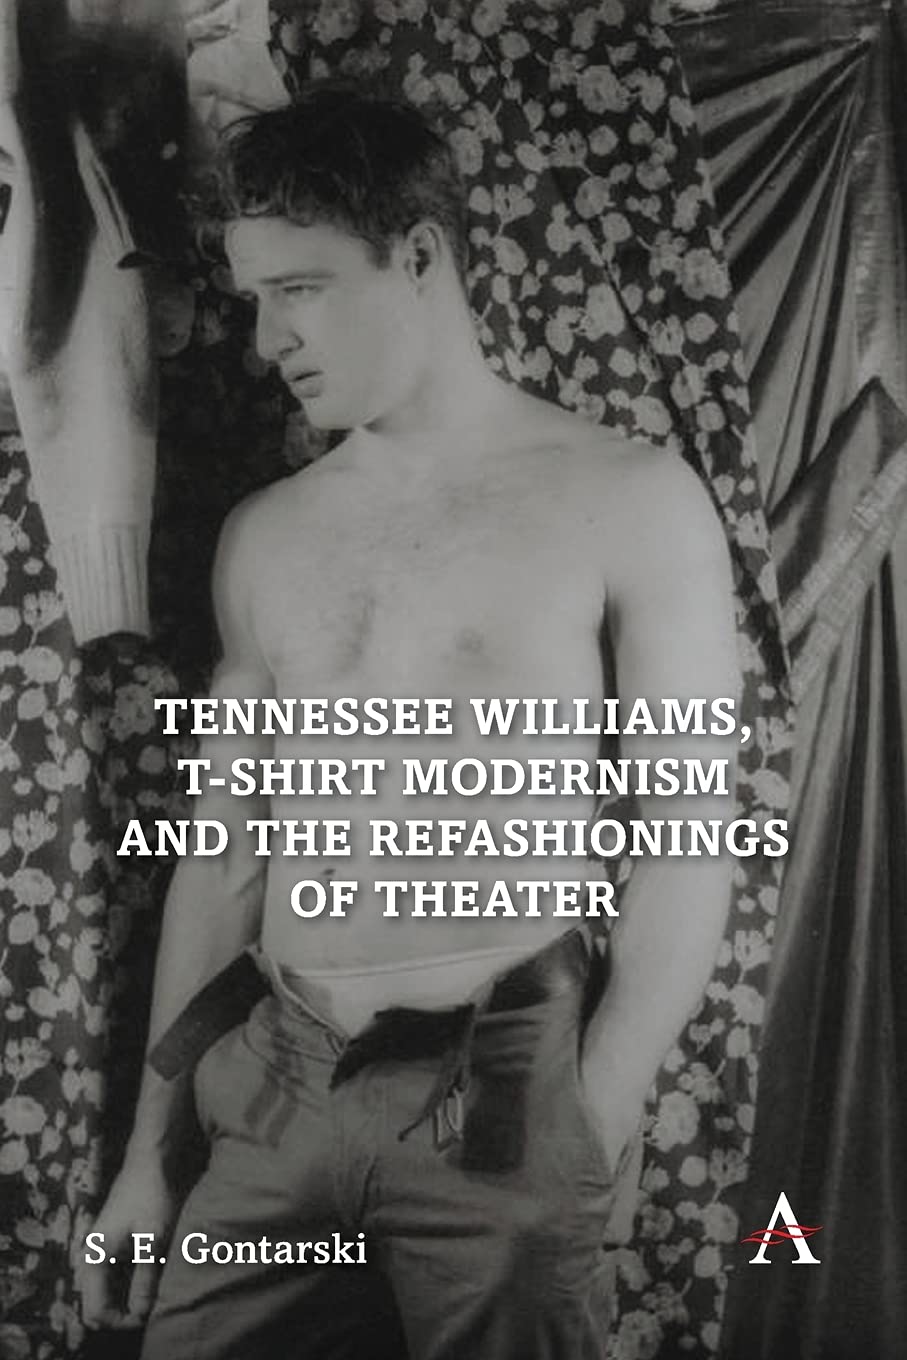 ennessee Williams, T-shirt Modernism and the Refashionings of Theater (Anthem Studies in Theatre and Performance) - Original PDF